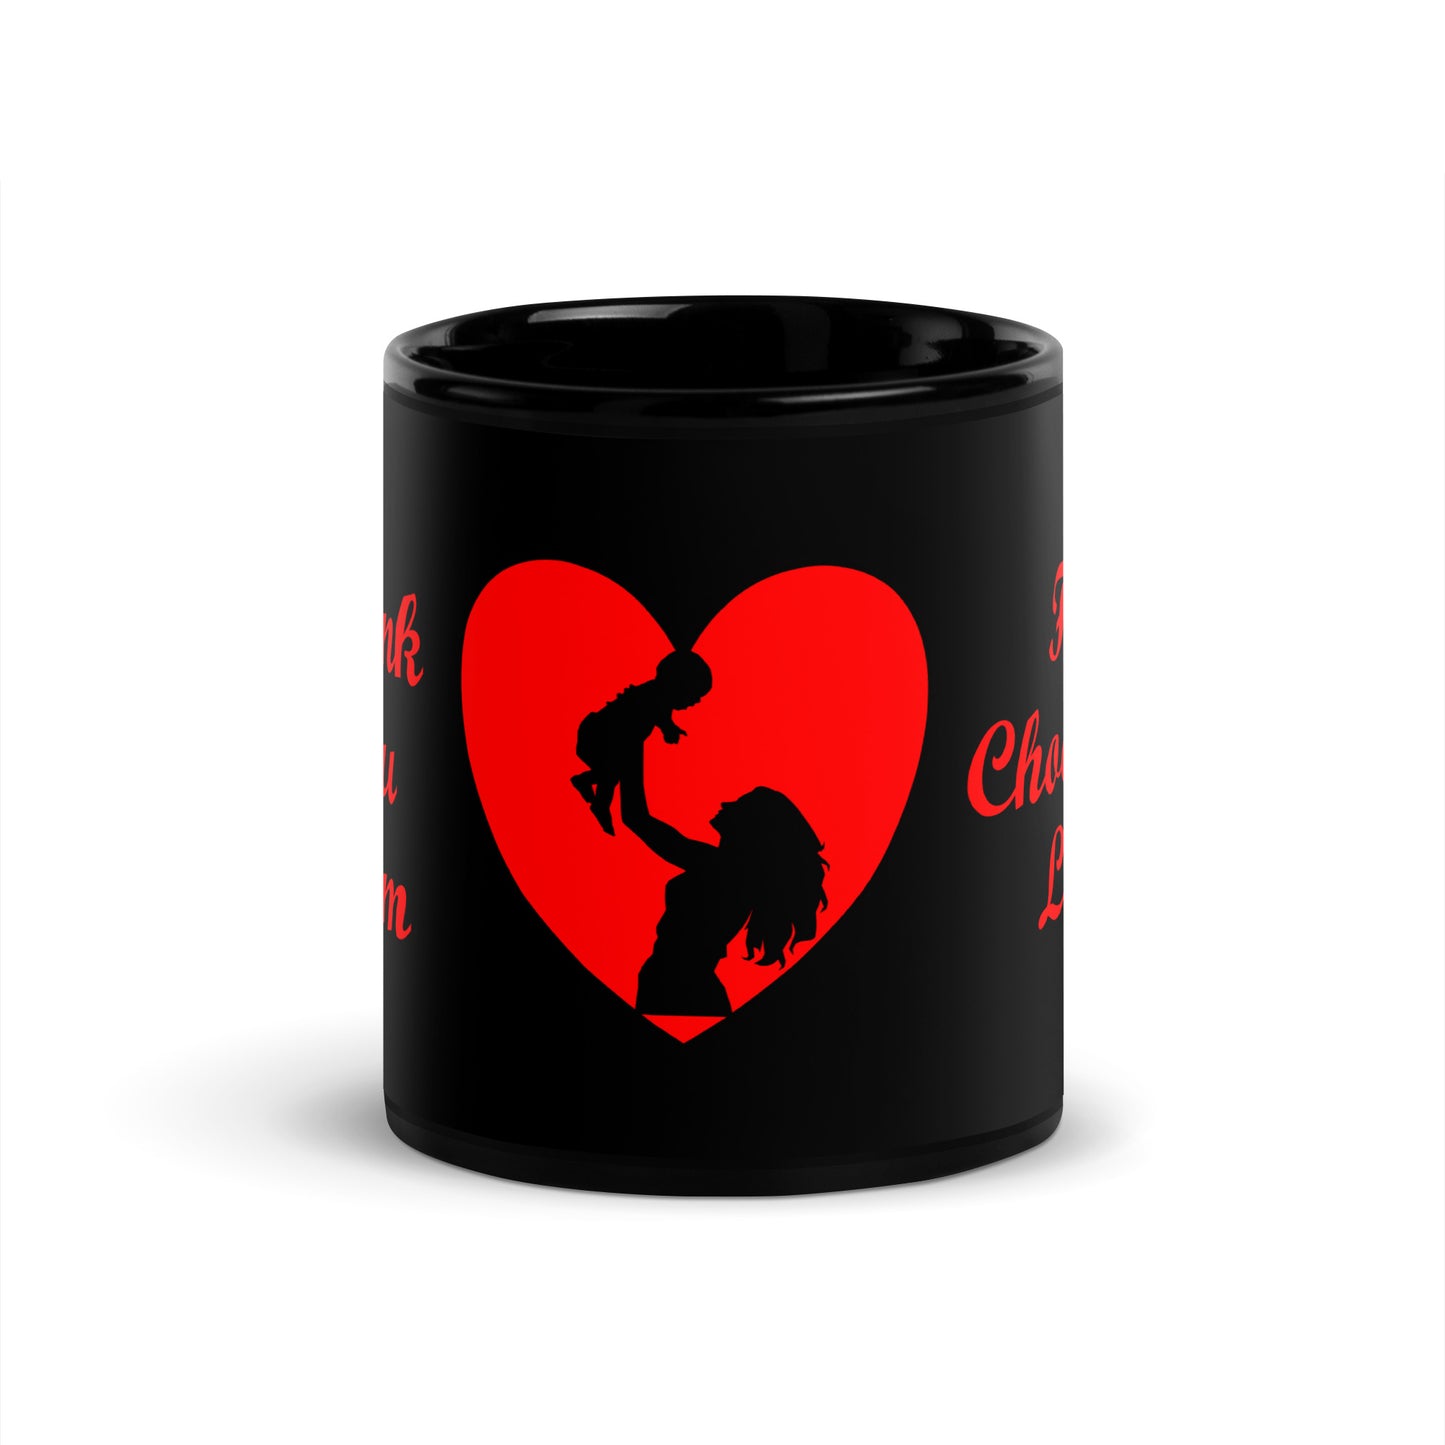 A002 Mug - Black Glossy Ceramic Mug Featuring Mother and Baby Graphic with text “Thank You Mom For Choosing Life.”